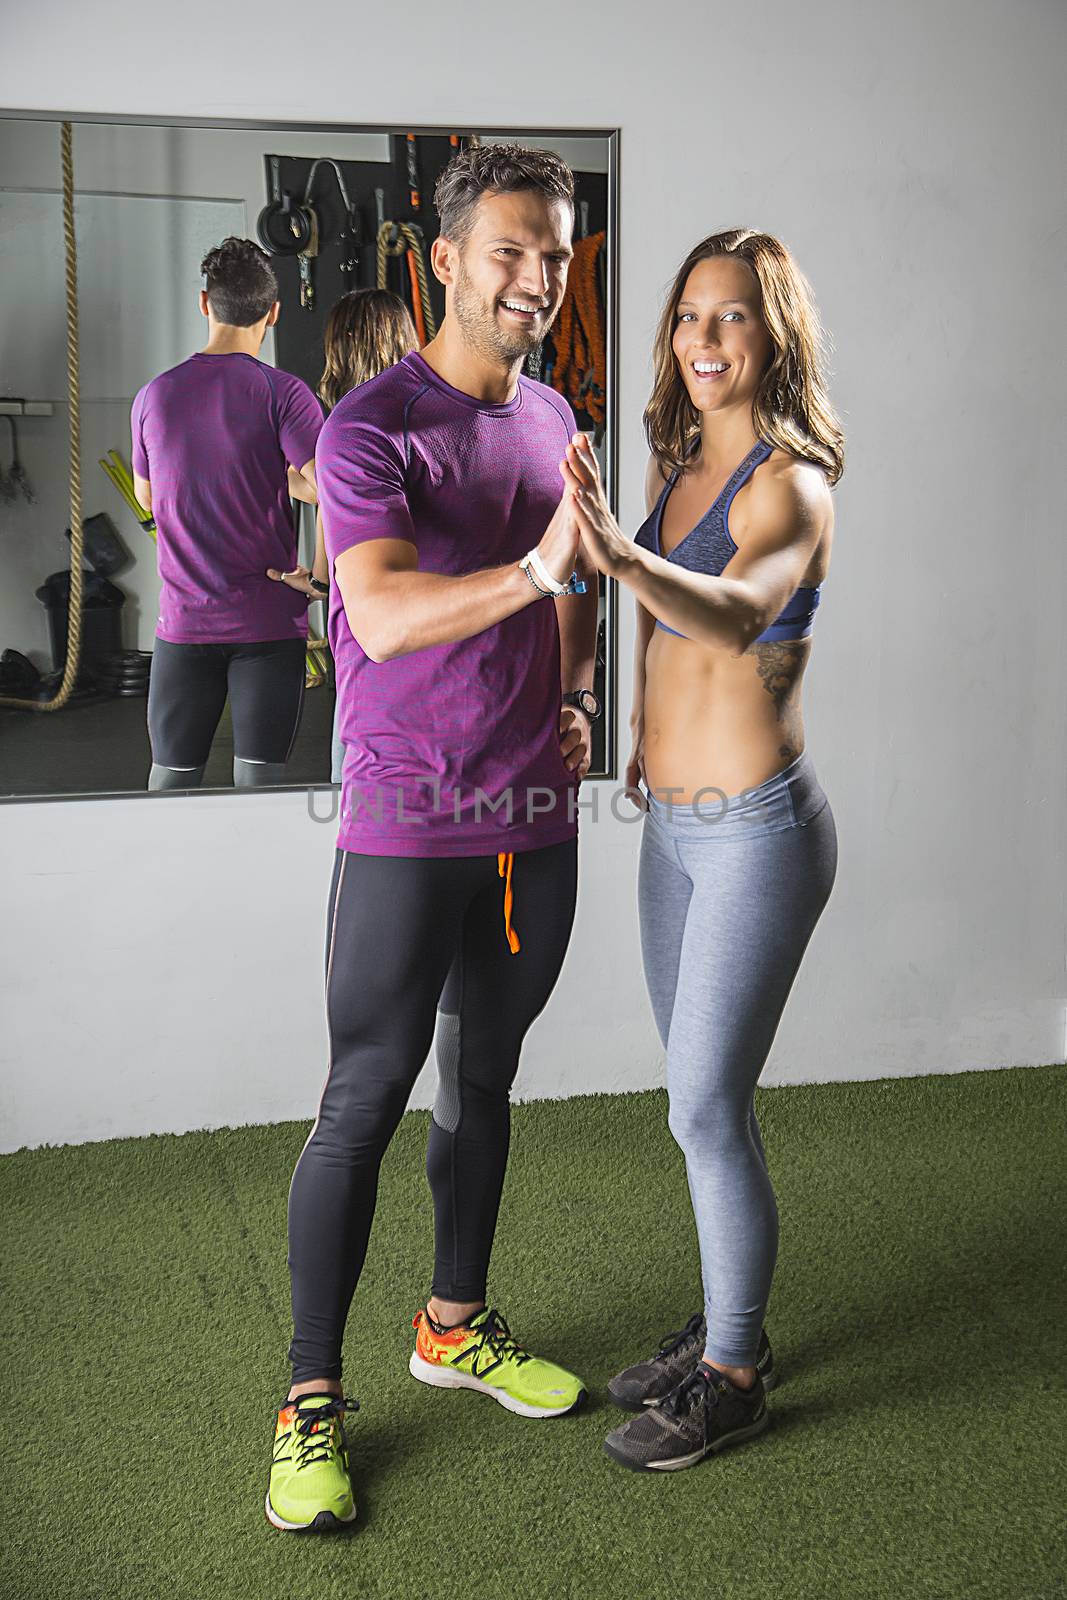 Training couple giving themselve a high five